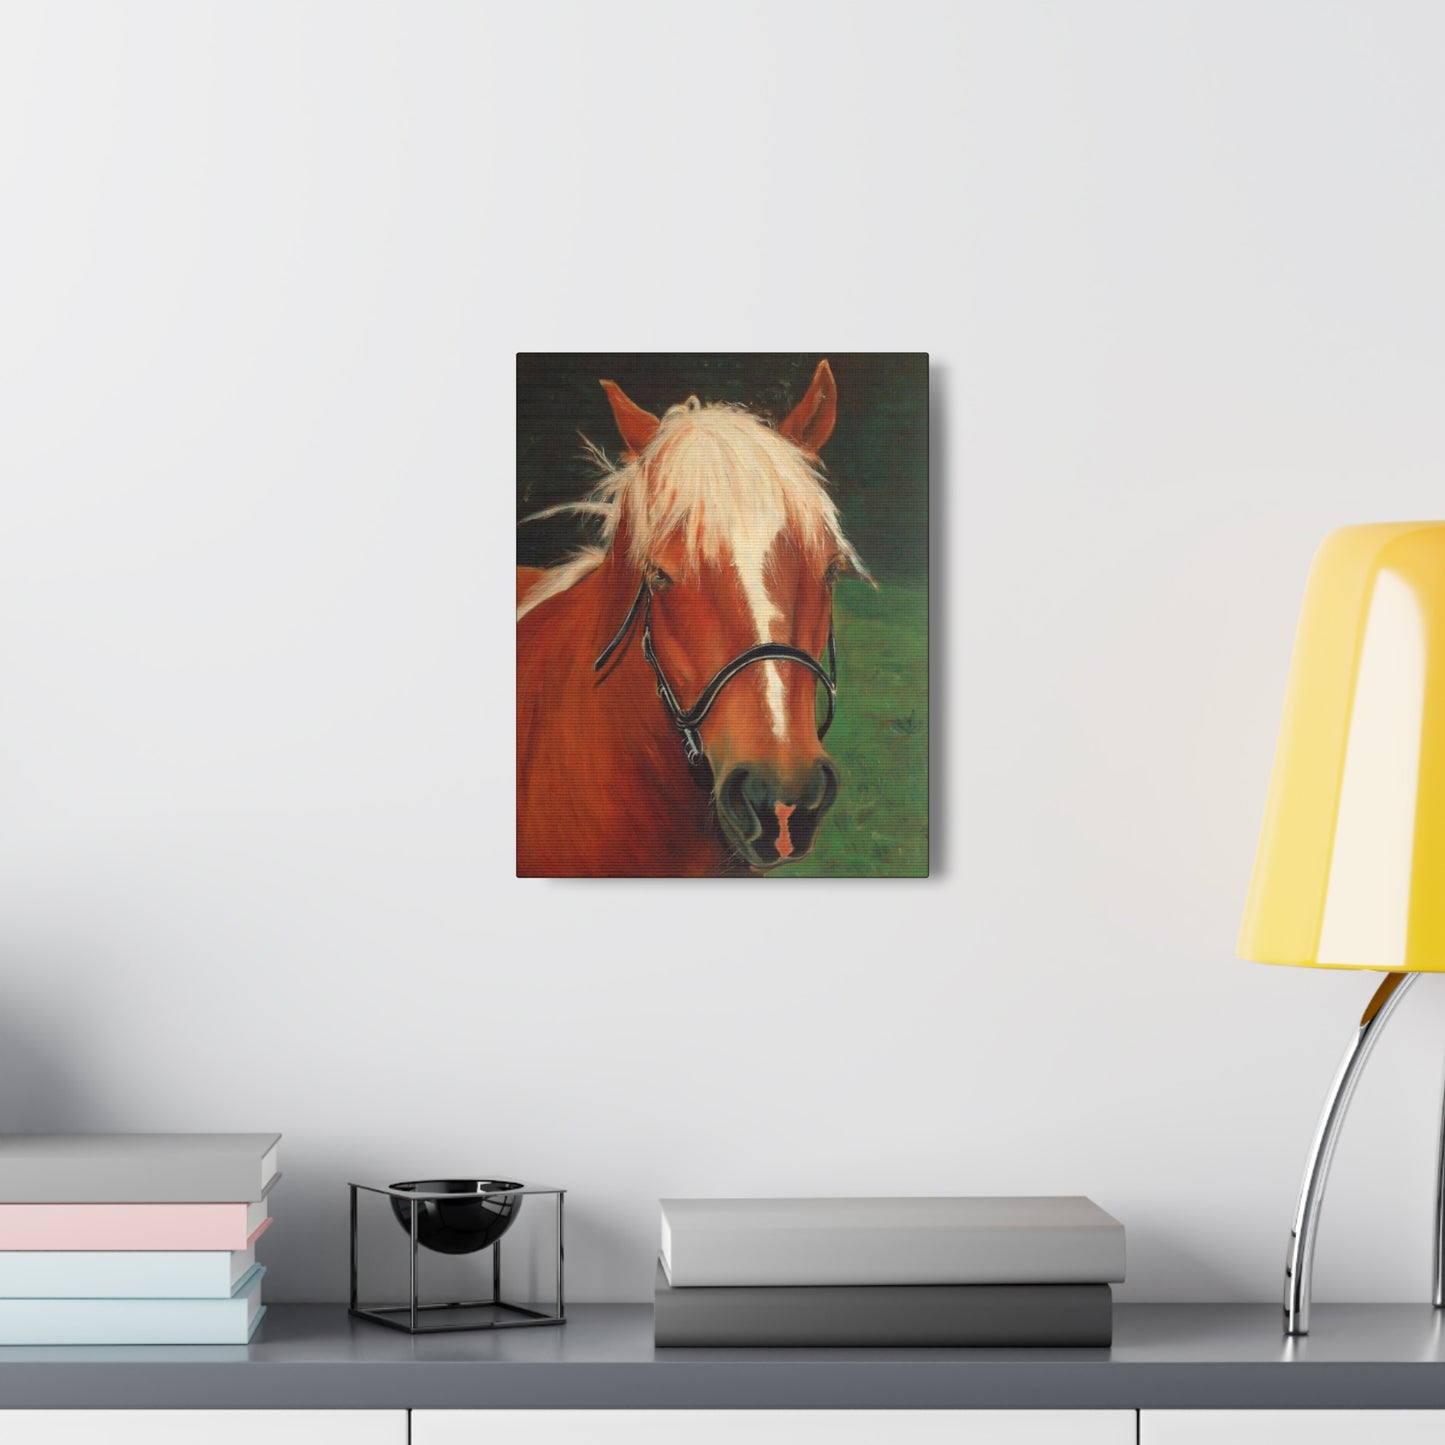 Brown Horse - Gallery Wrap Canvas Print